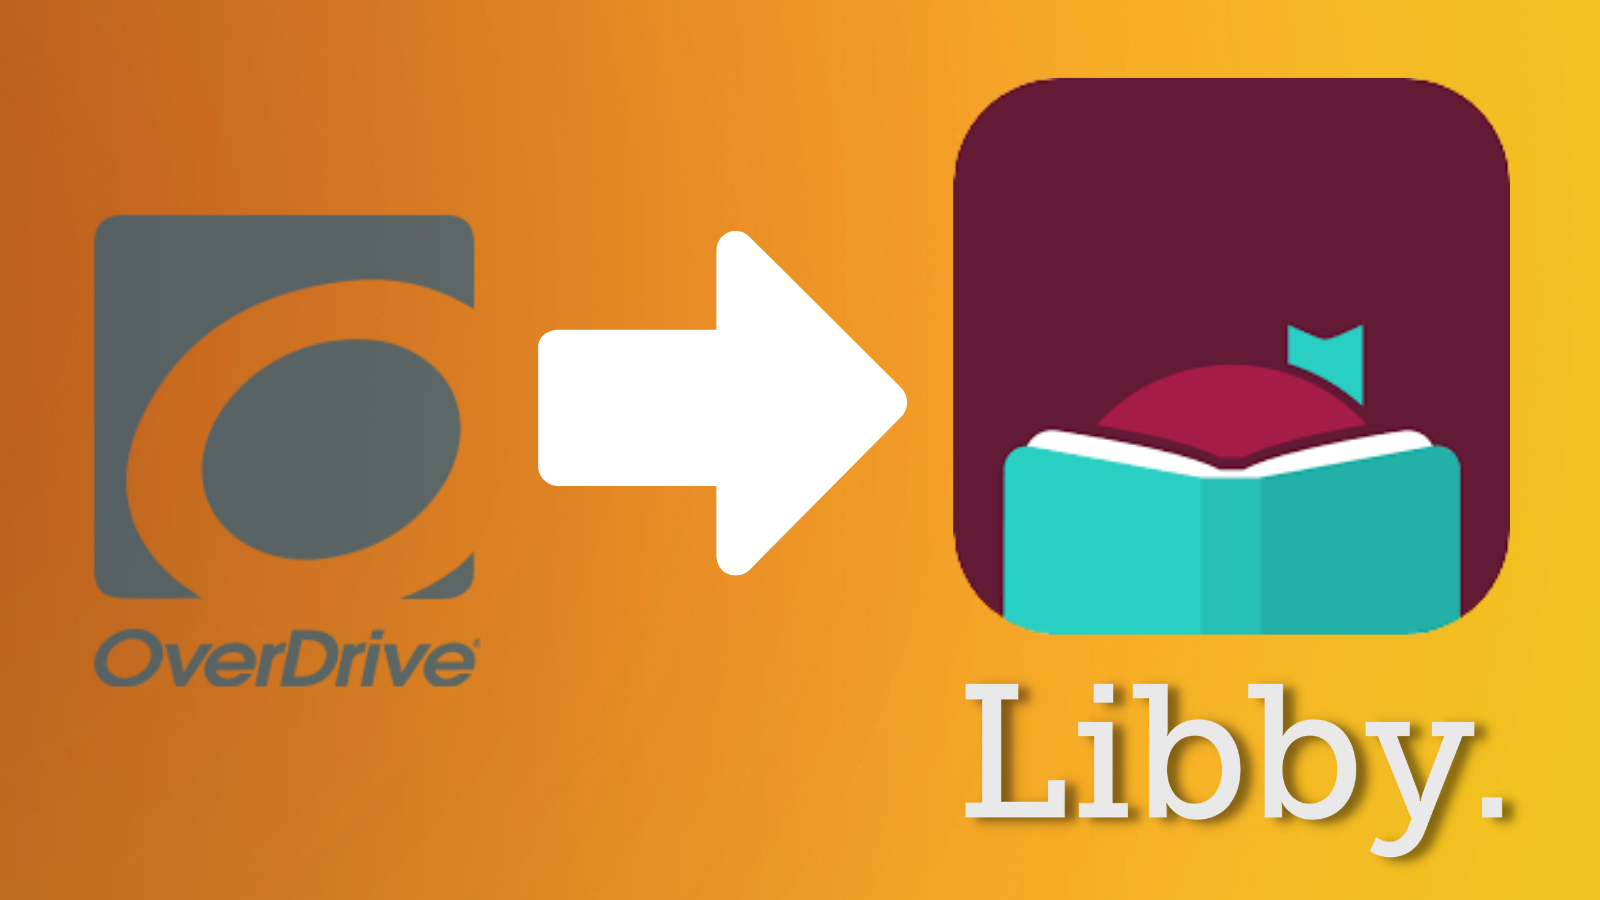 OverDrive app logo on the left, Libby app logo on the right, arrow in between pointing at the Libby app logo